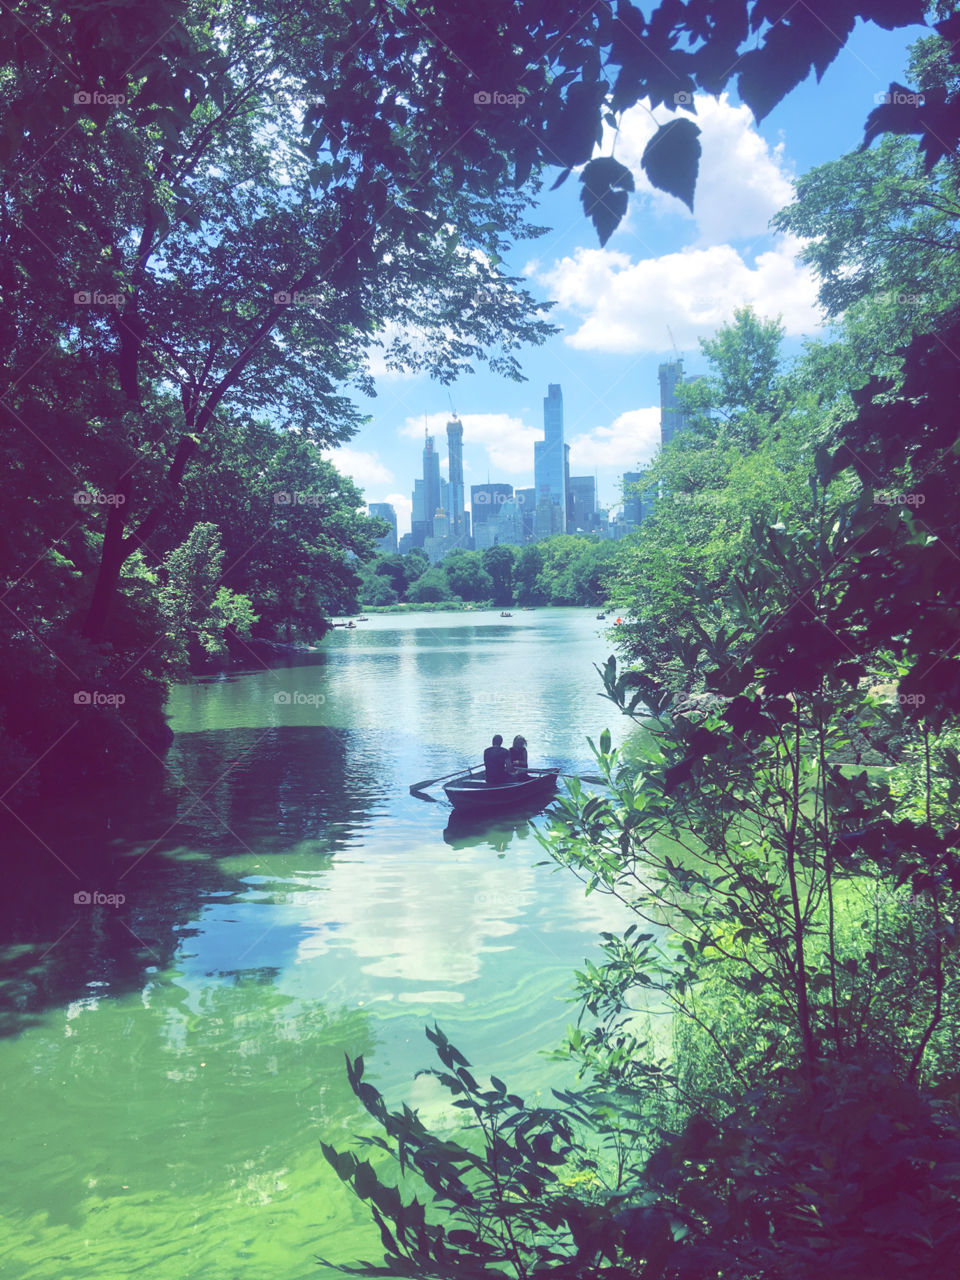 Mental health is a real struggle sometimes the only cure is nature, a beautiful boat ride with your lover by your side in Central Park in NYC where dreams are made of and our ripples of love will surround us in an eternity of happiness and wellbeing.